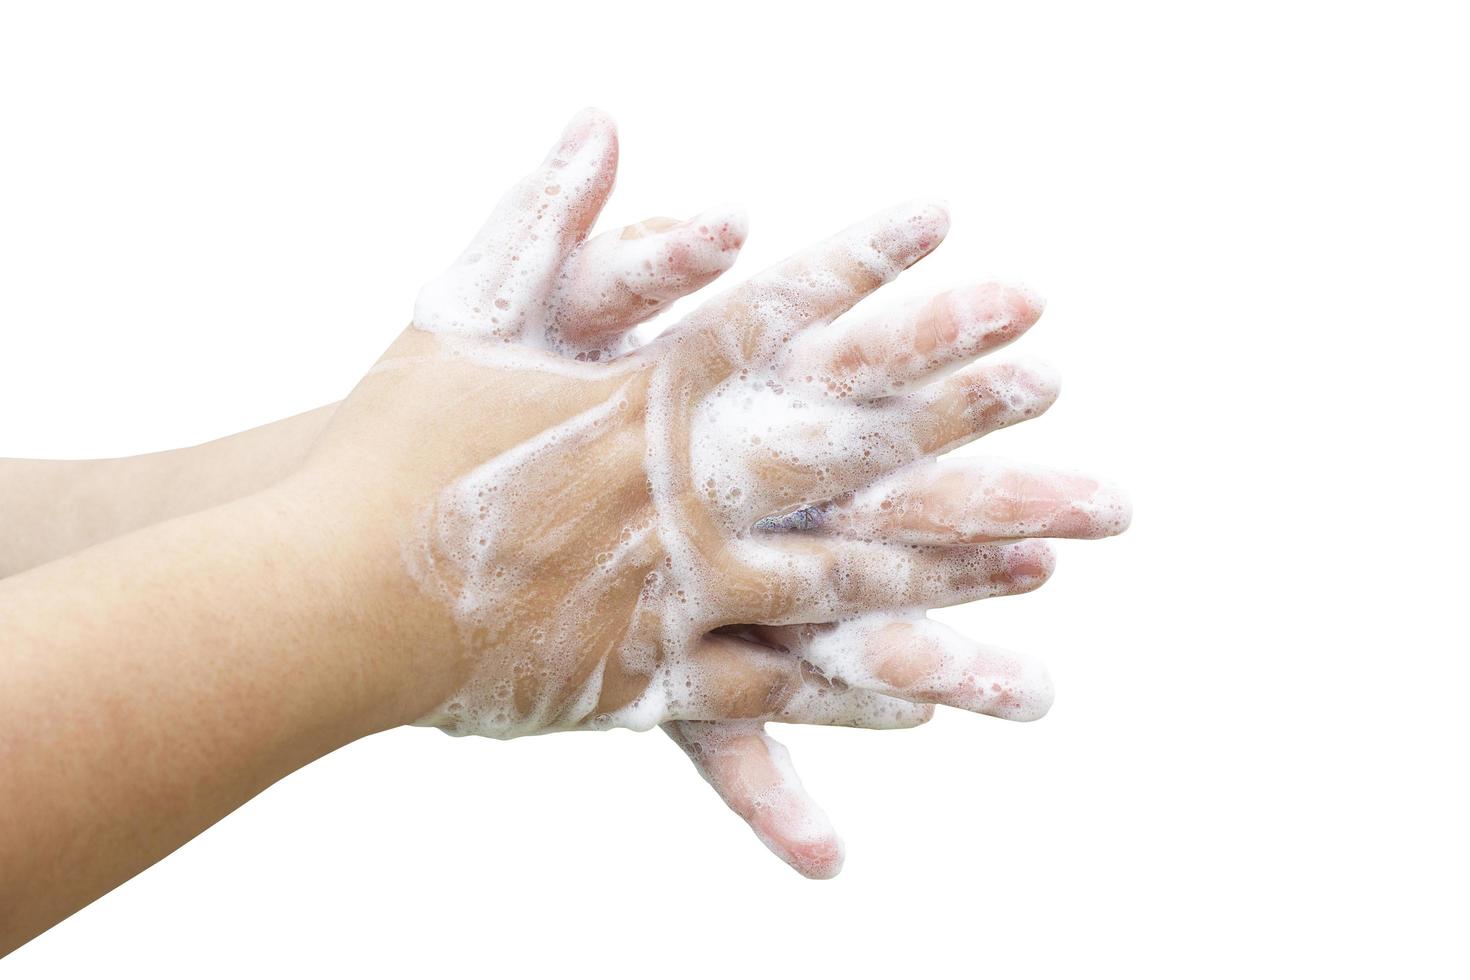 Hands washing soap foam isolated on white background with clipping path,Prevent germs, bacteria or viruses. photo